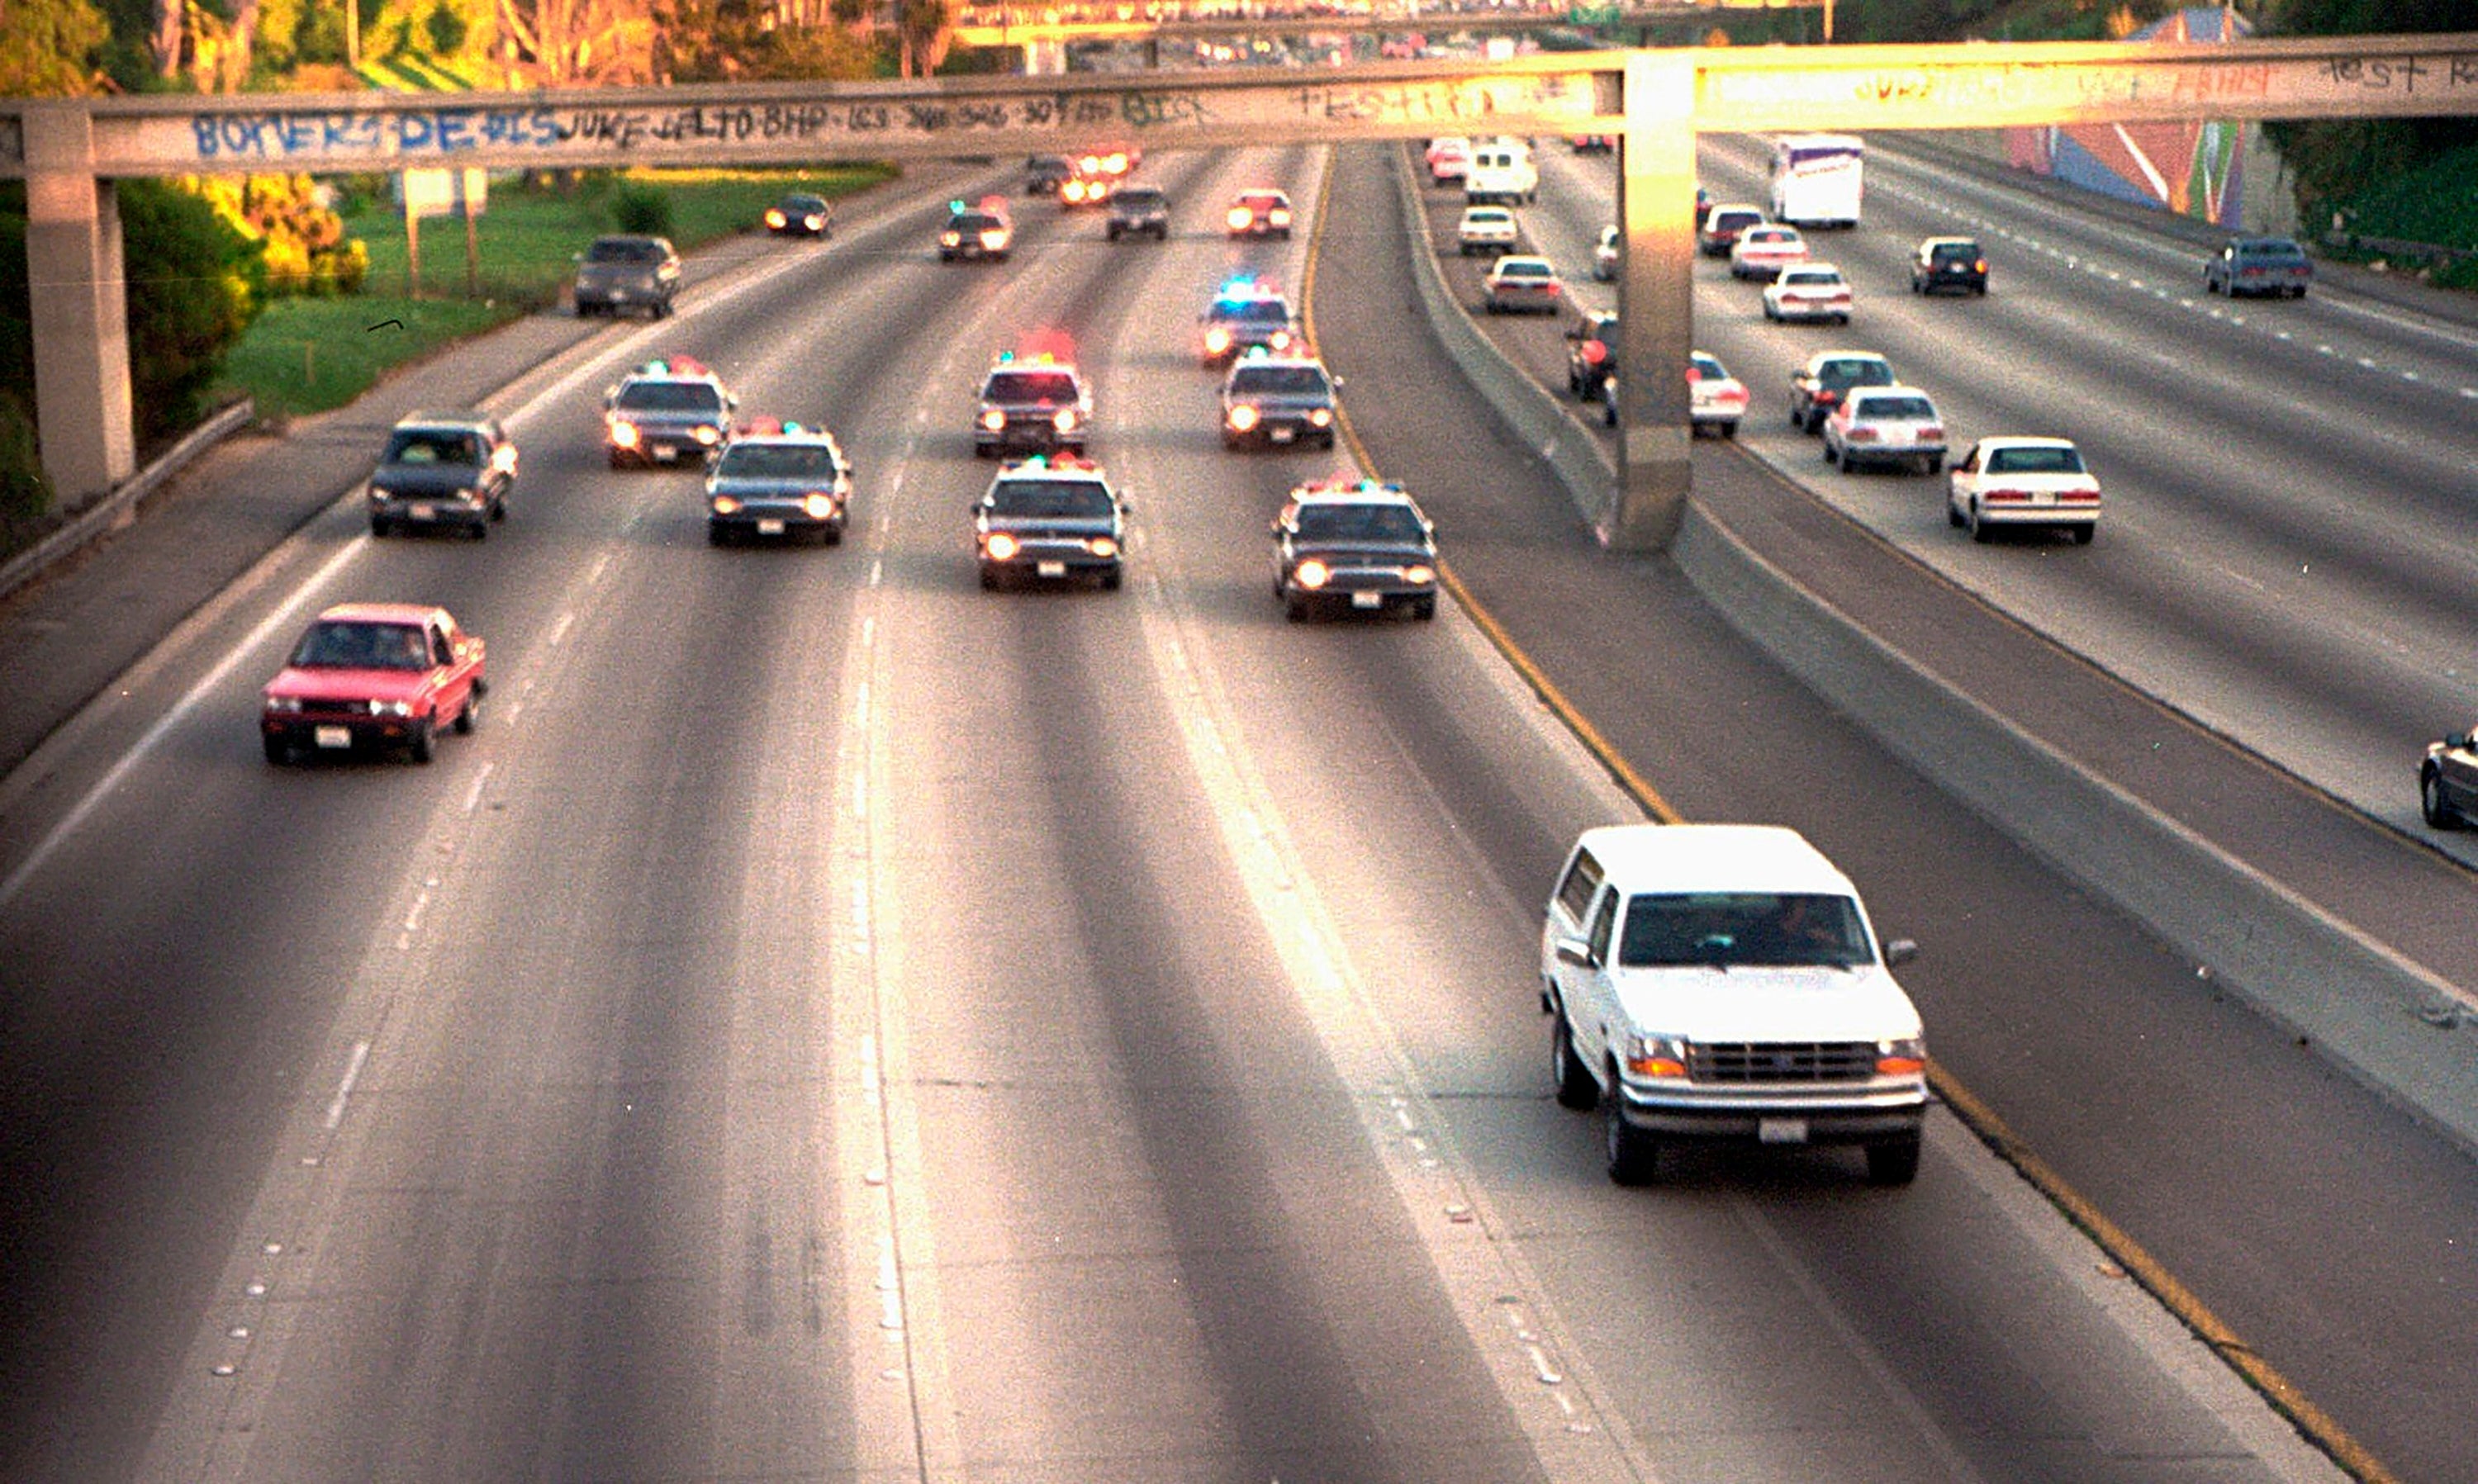 OJ Simpson pursued by police on June 17 1994. Today marks the 30th anniversary of the chase.